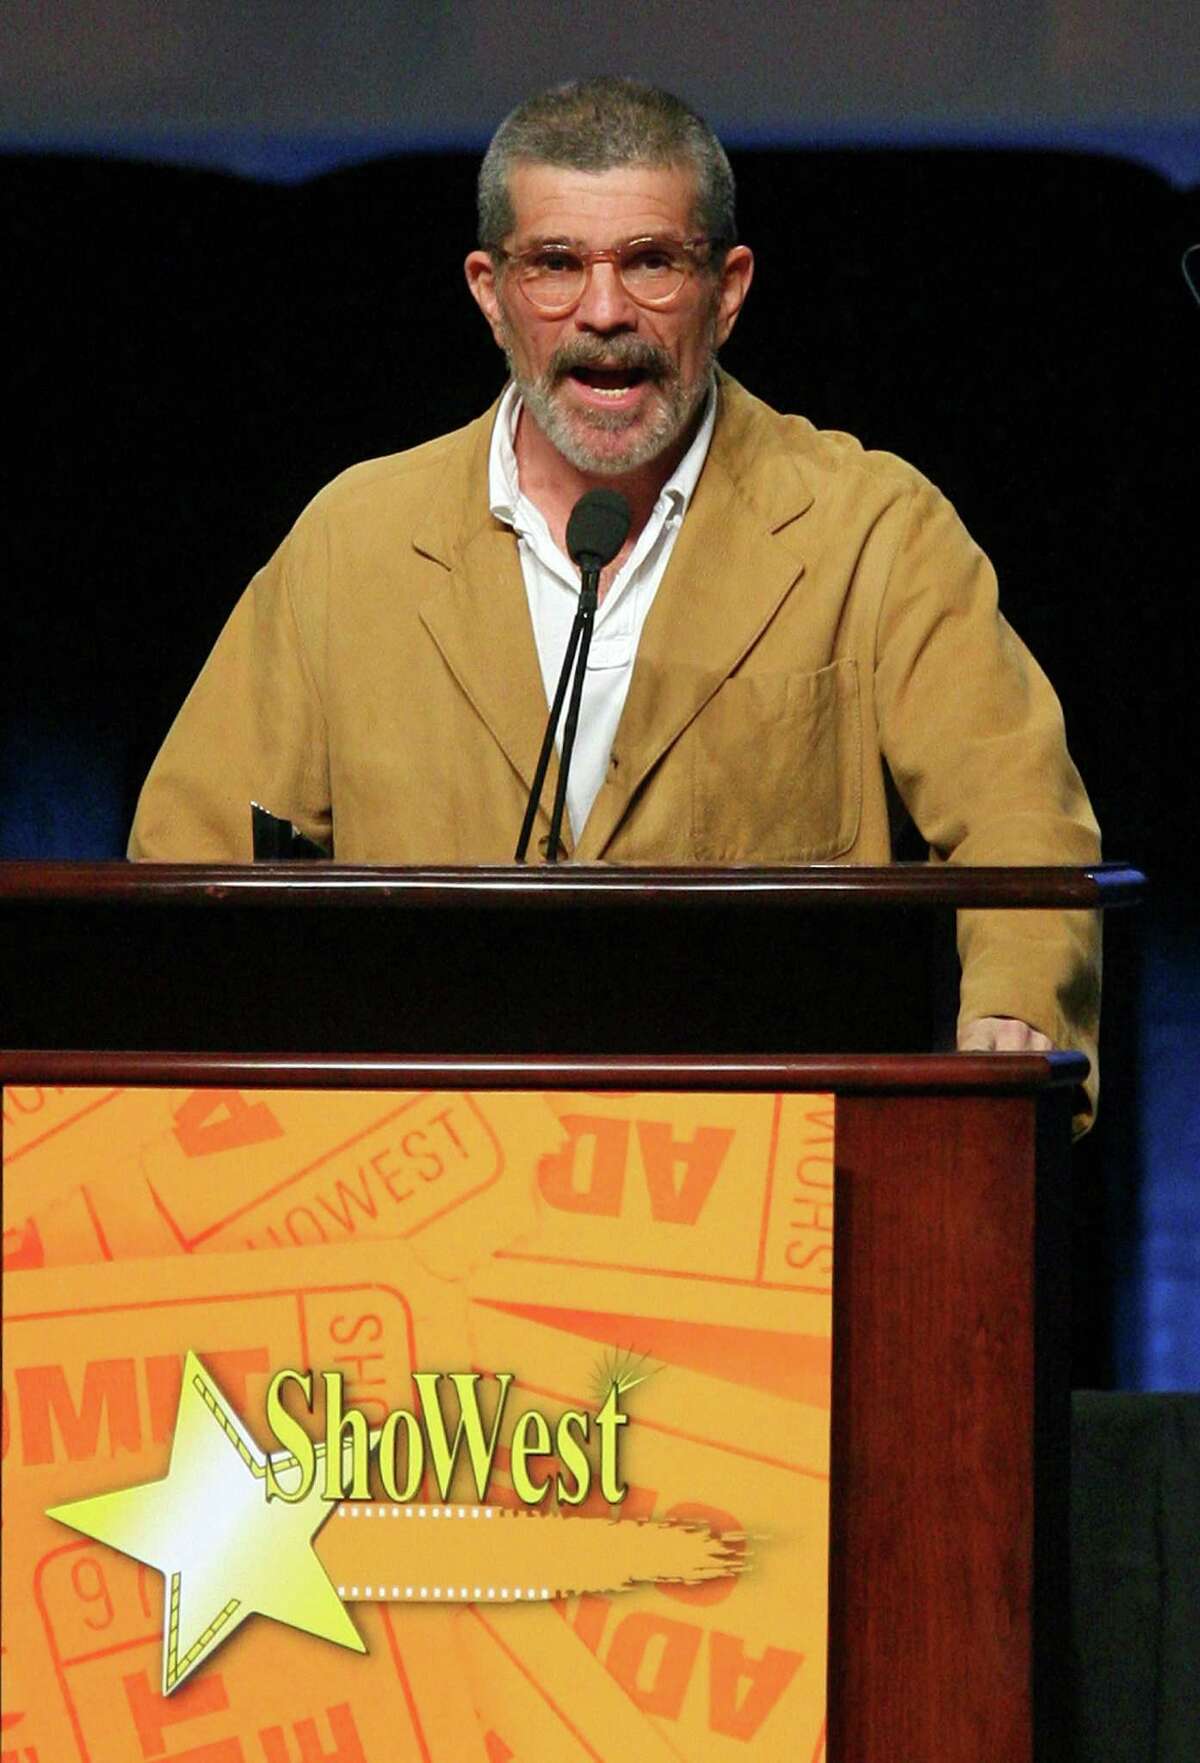 LAS VEGAS - MARCH 11: Screenwriter/director David Mamet accepts the ShoWest Award of Excellence in Filmmaking at the Paris Las Vegas during the opening day luncheon for ShoWest, the official convention of the National Association of Theatre Owners, March 11, 2008 in Las Vegas, Nevada. (Photo by Ethan Miller/Getty Images)